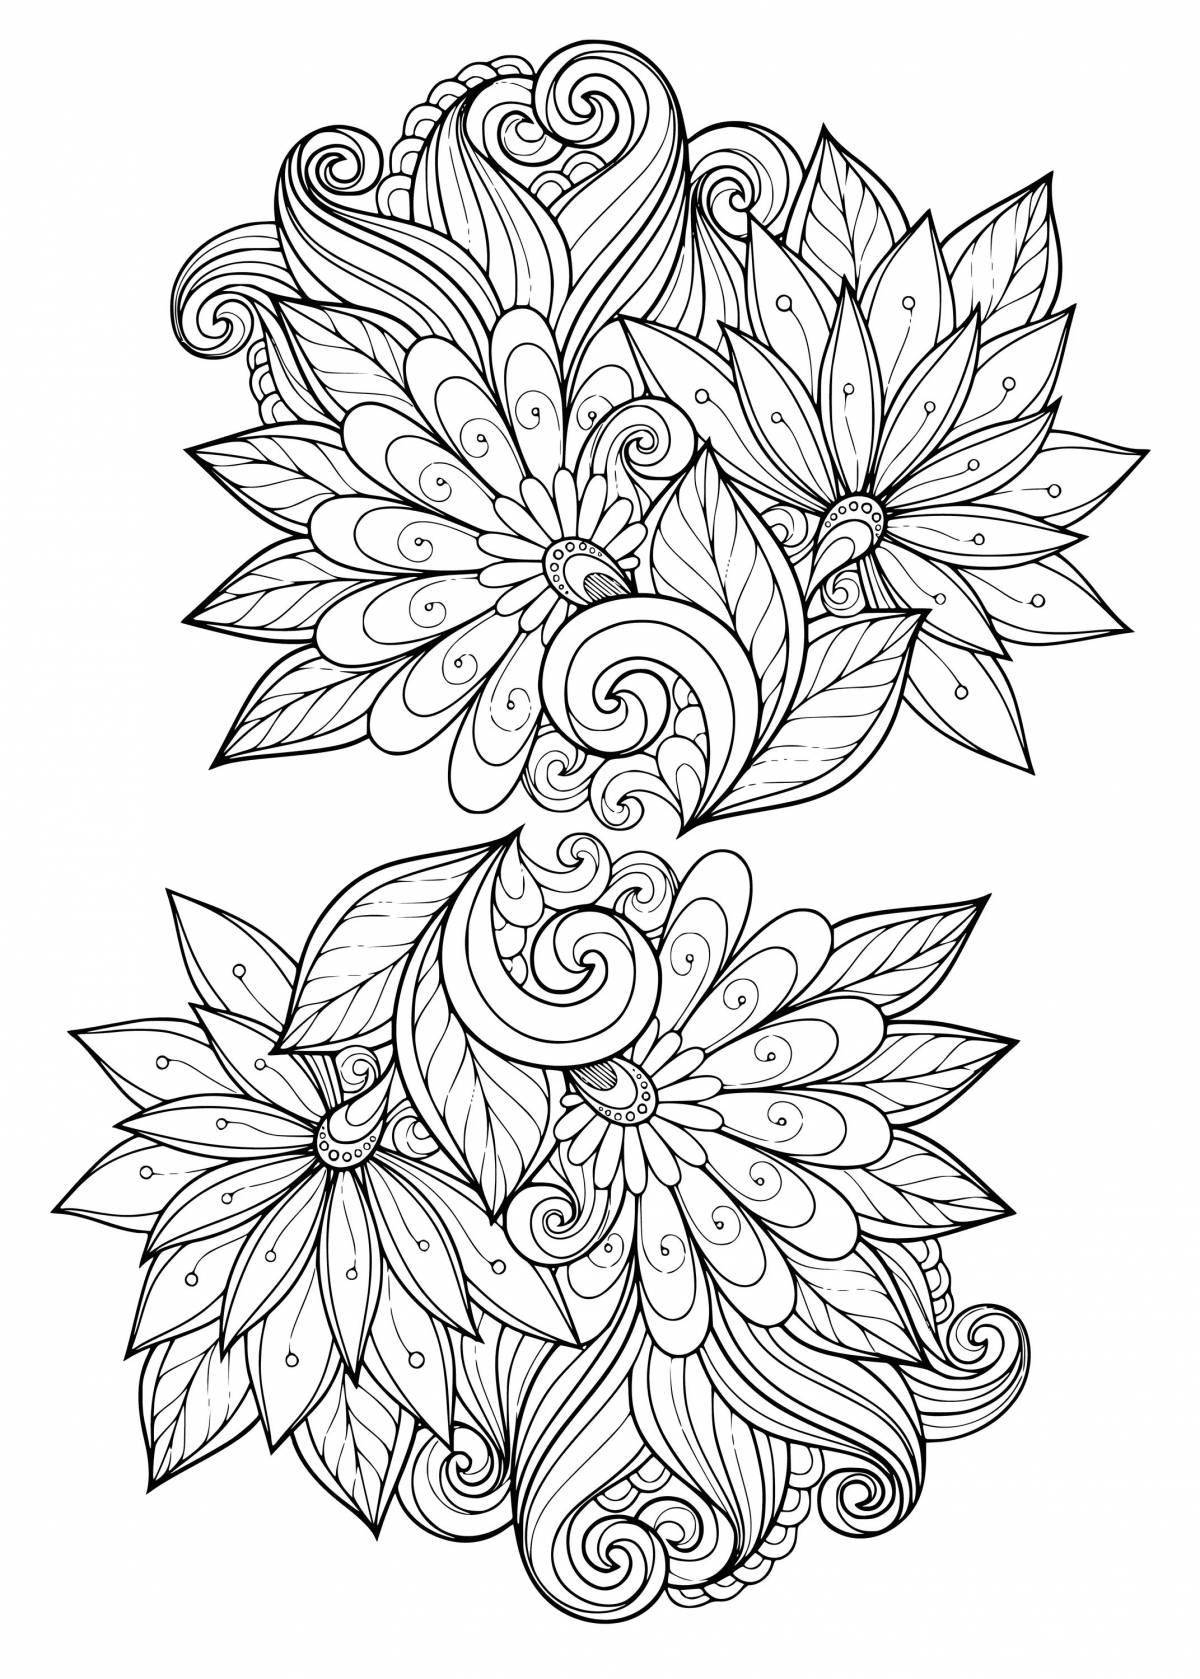 Relaxing coloring flowers antistress